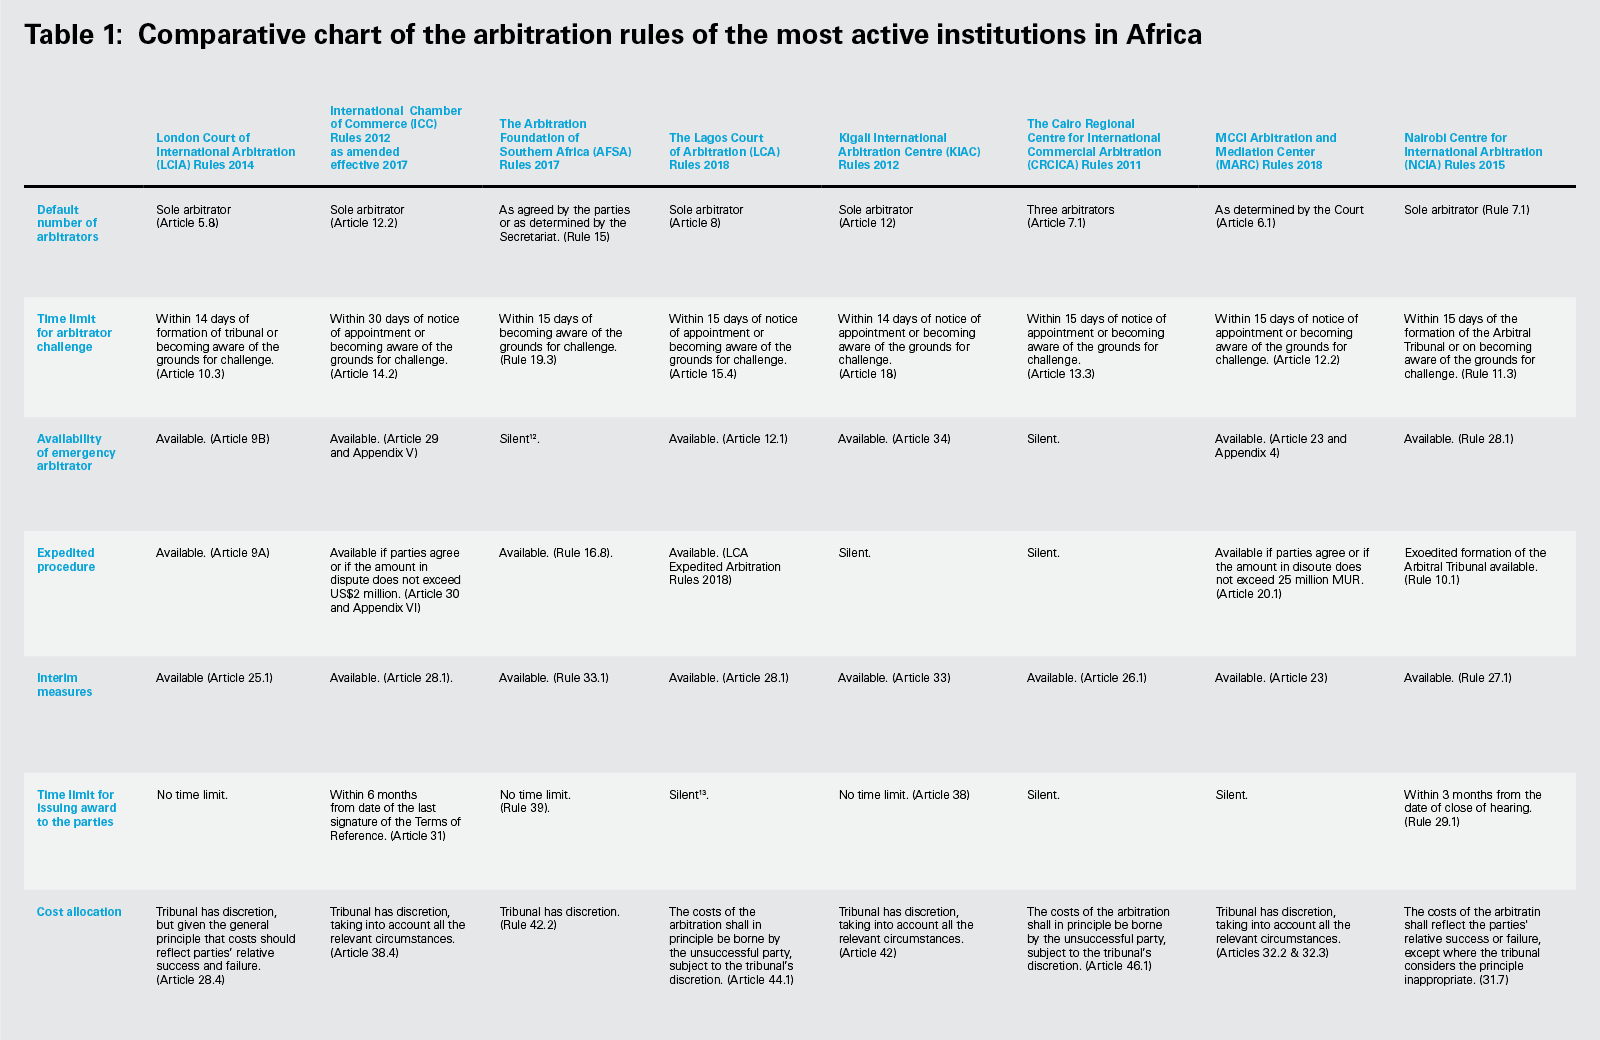 Comparative chart of the arbitration rules of the most active institutions in Africa (PDF)